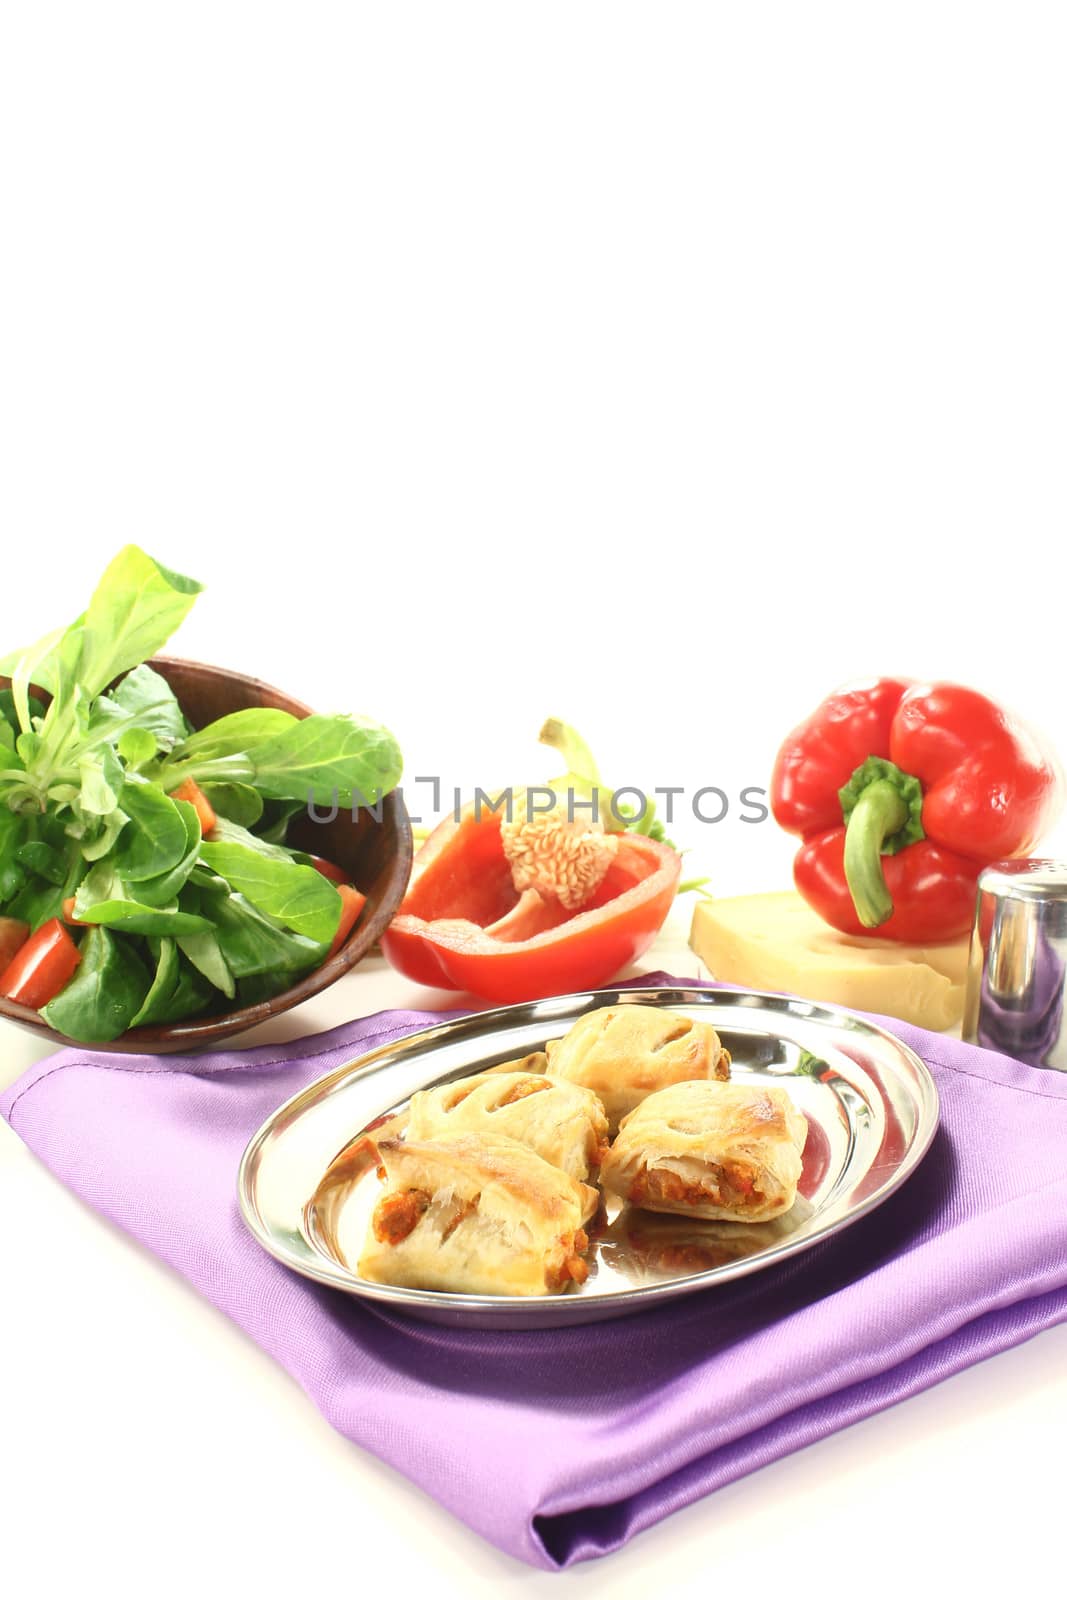 Puff pastry with bell peppers on a light background